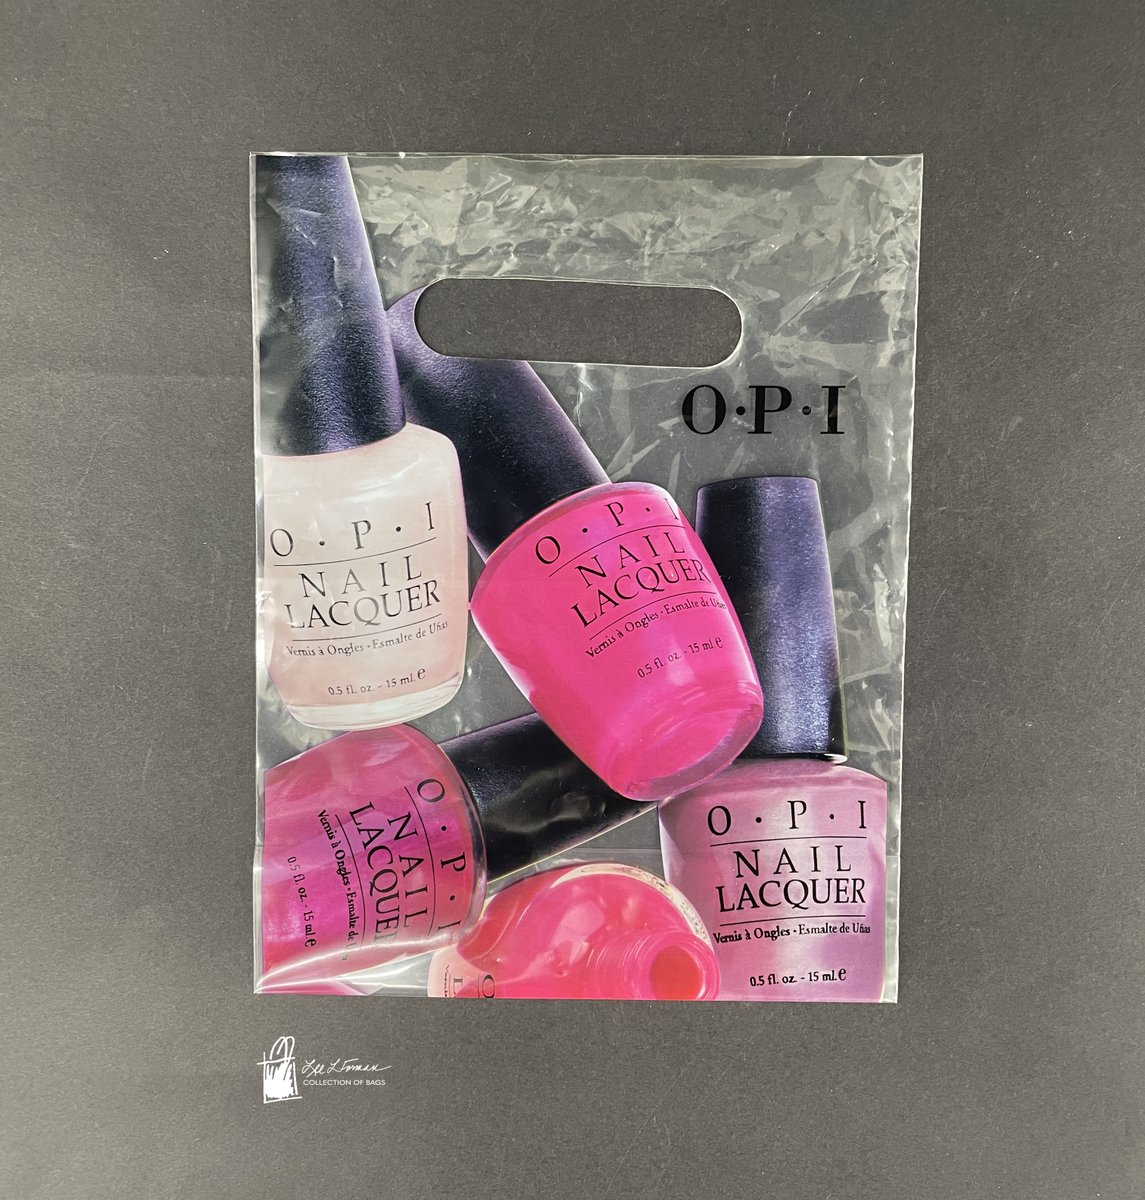 184/365: Odontorium Products, Inc. - better known as O.P.I. - started as a dental supplier. It was only after being purchased by George Schaeffer in 1981 that the company turned to nail polish and began abbreviating their name.